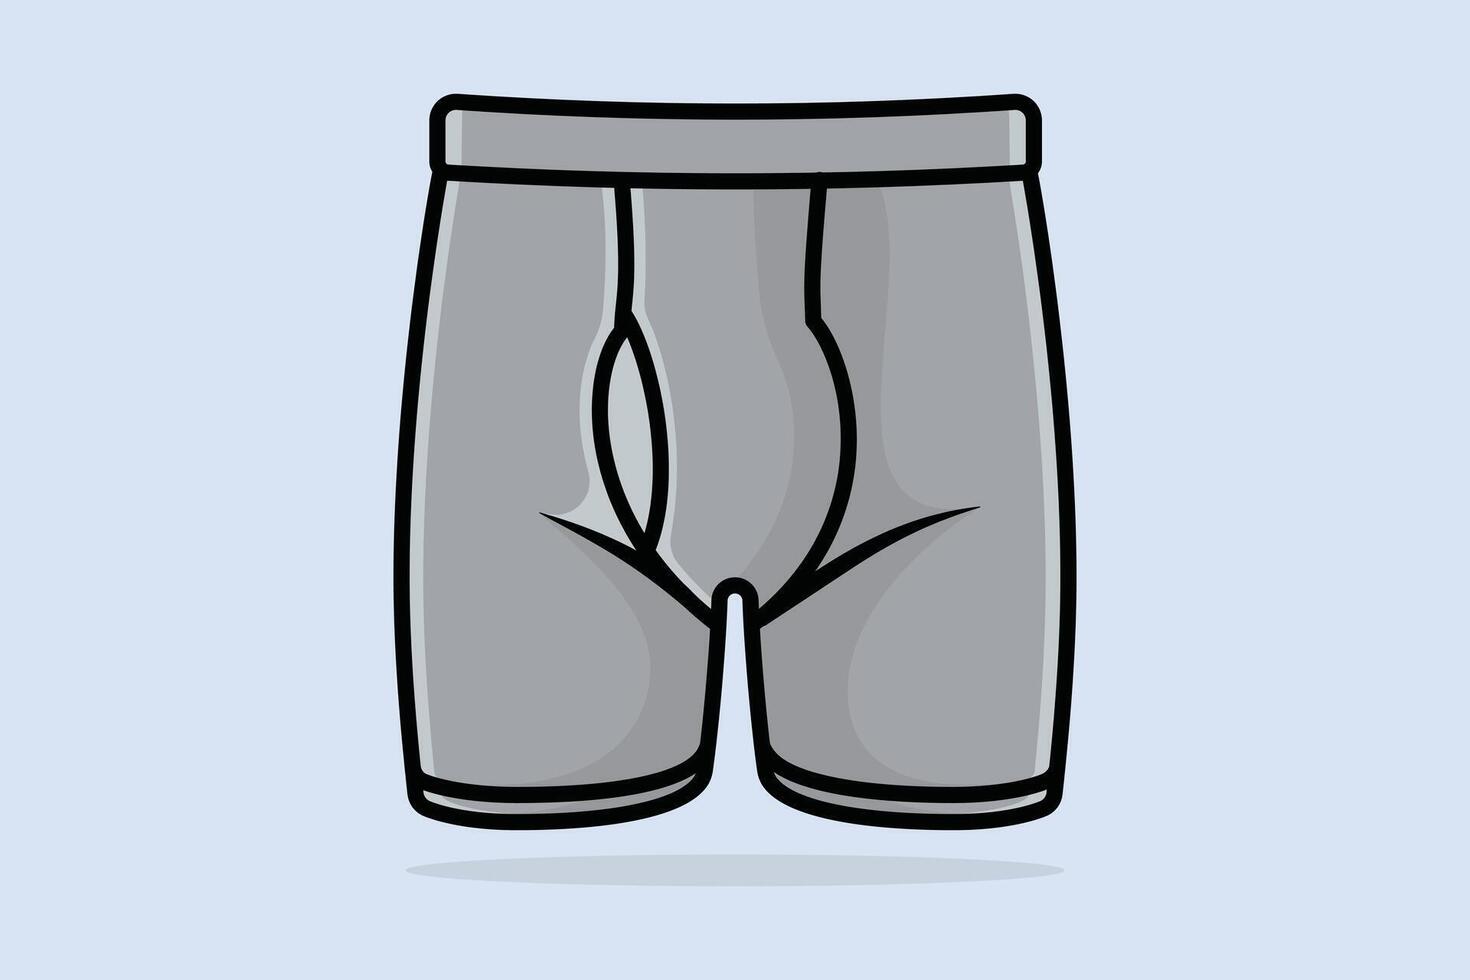 Boys Comfortable Underwear Short vector illustration. Sports and Fashion objects icon concept.